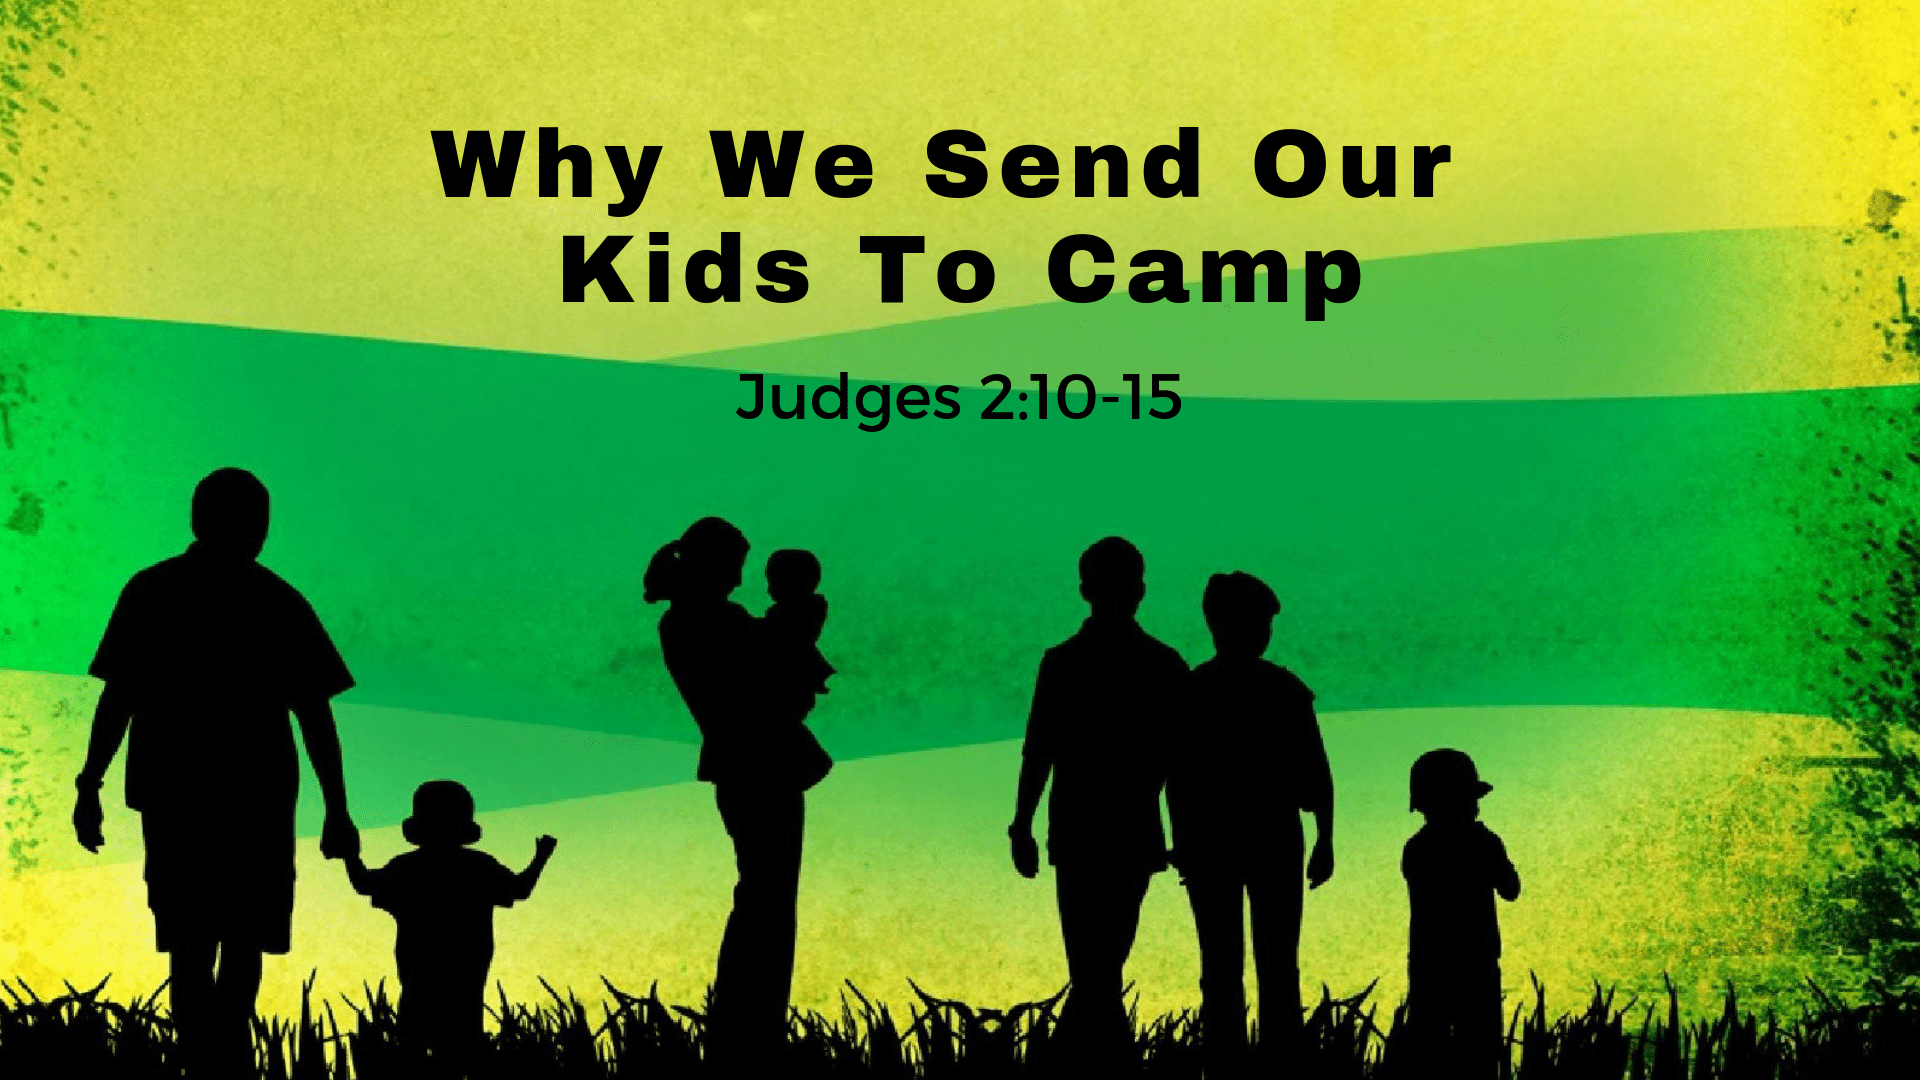 Why We Send Our Kids To Camp